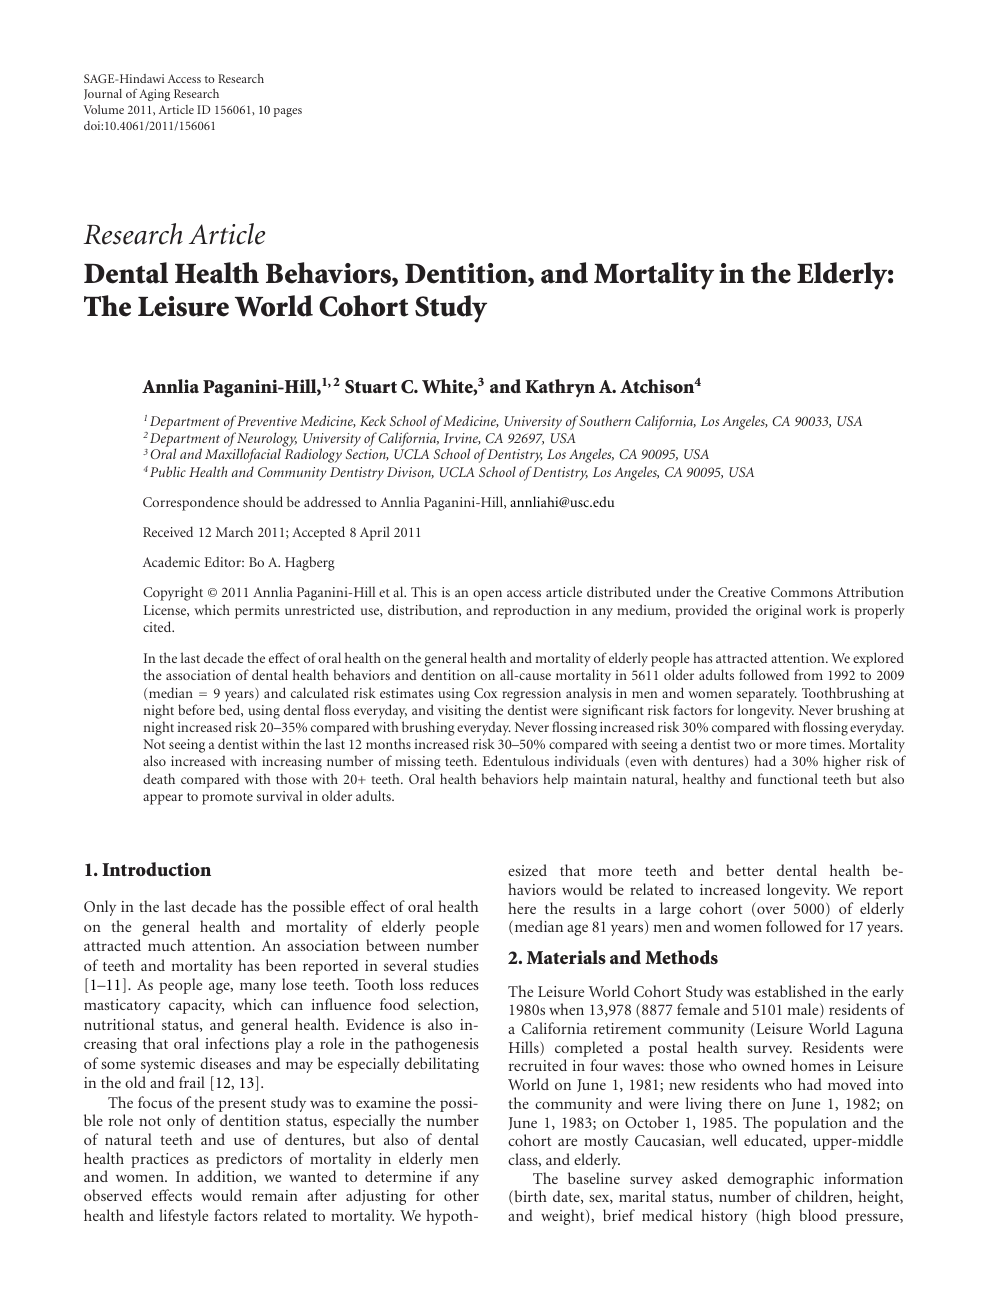 Dental Health Behaviors Dentition And Mortality In The Elderly The Leisure World Cohort Study Topic Of Research Paper In Health Sciences Download Scholarly Article Pdf And Read For Free On Cyberleninka